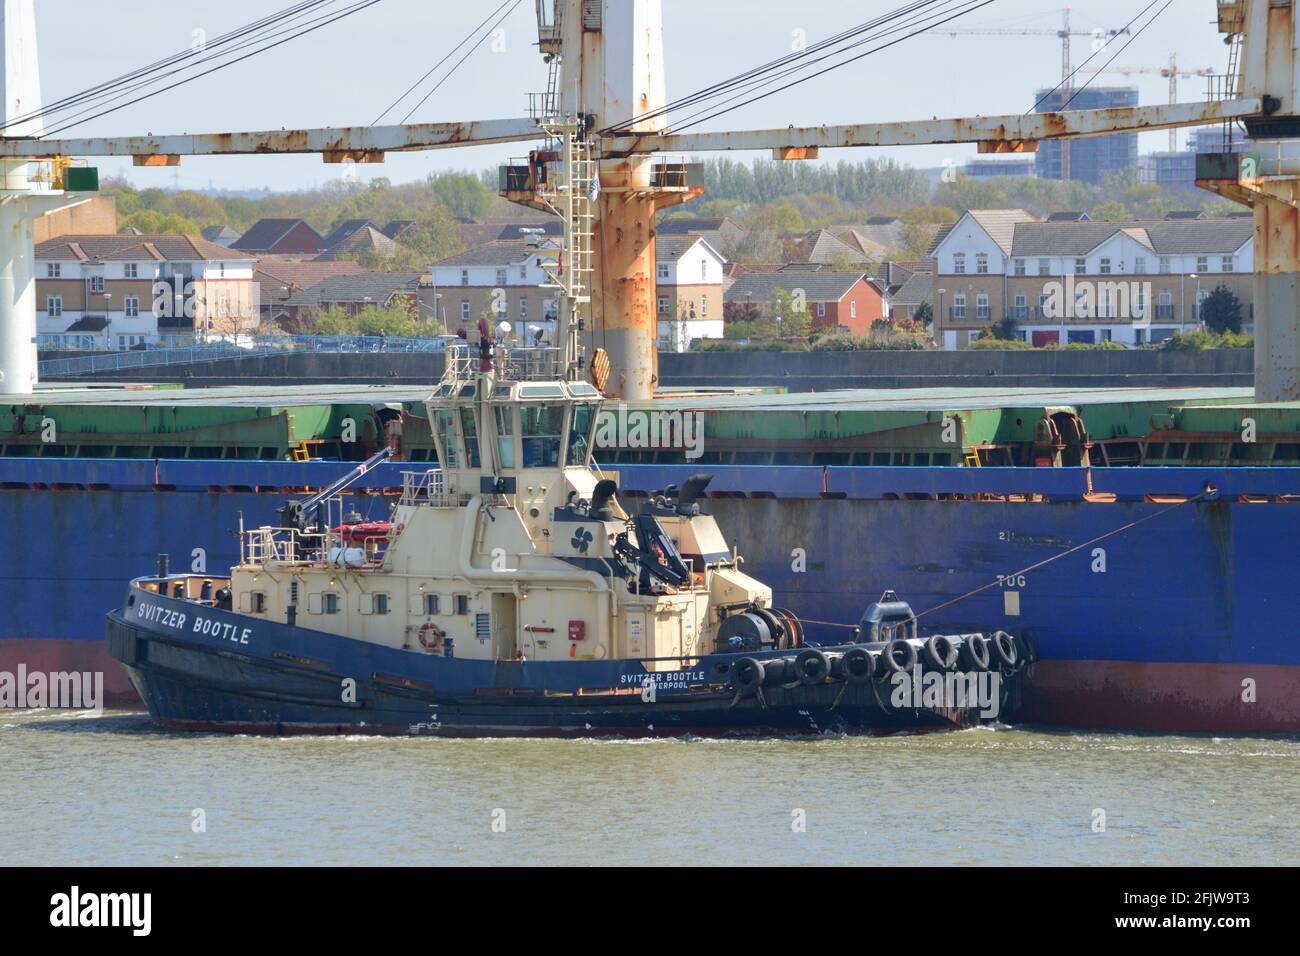 Svitzer Bootle tug assisting a large cargo ship heading up the Thames in London Stock Photo